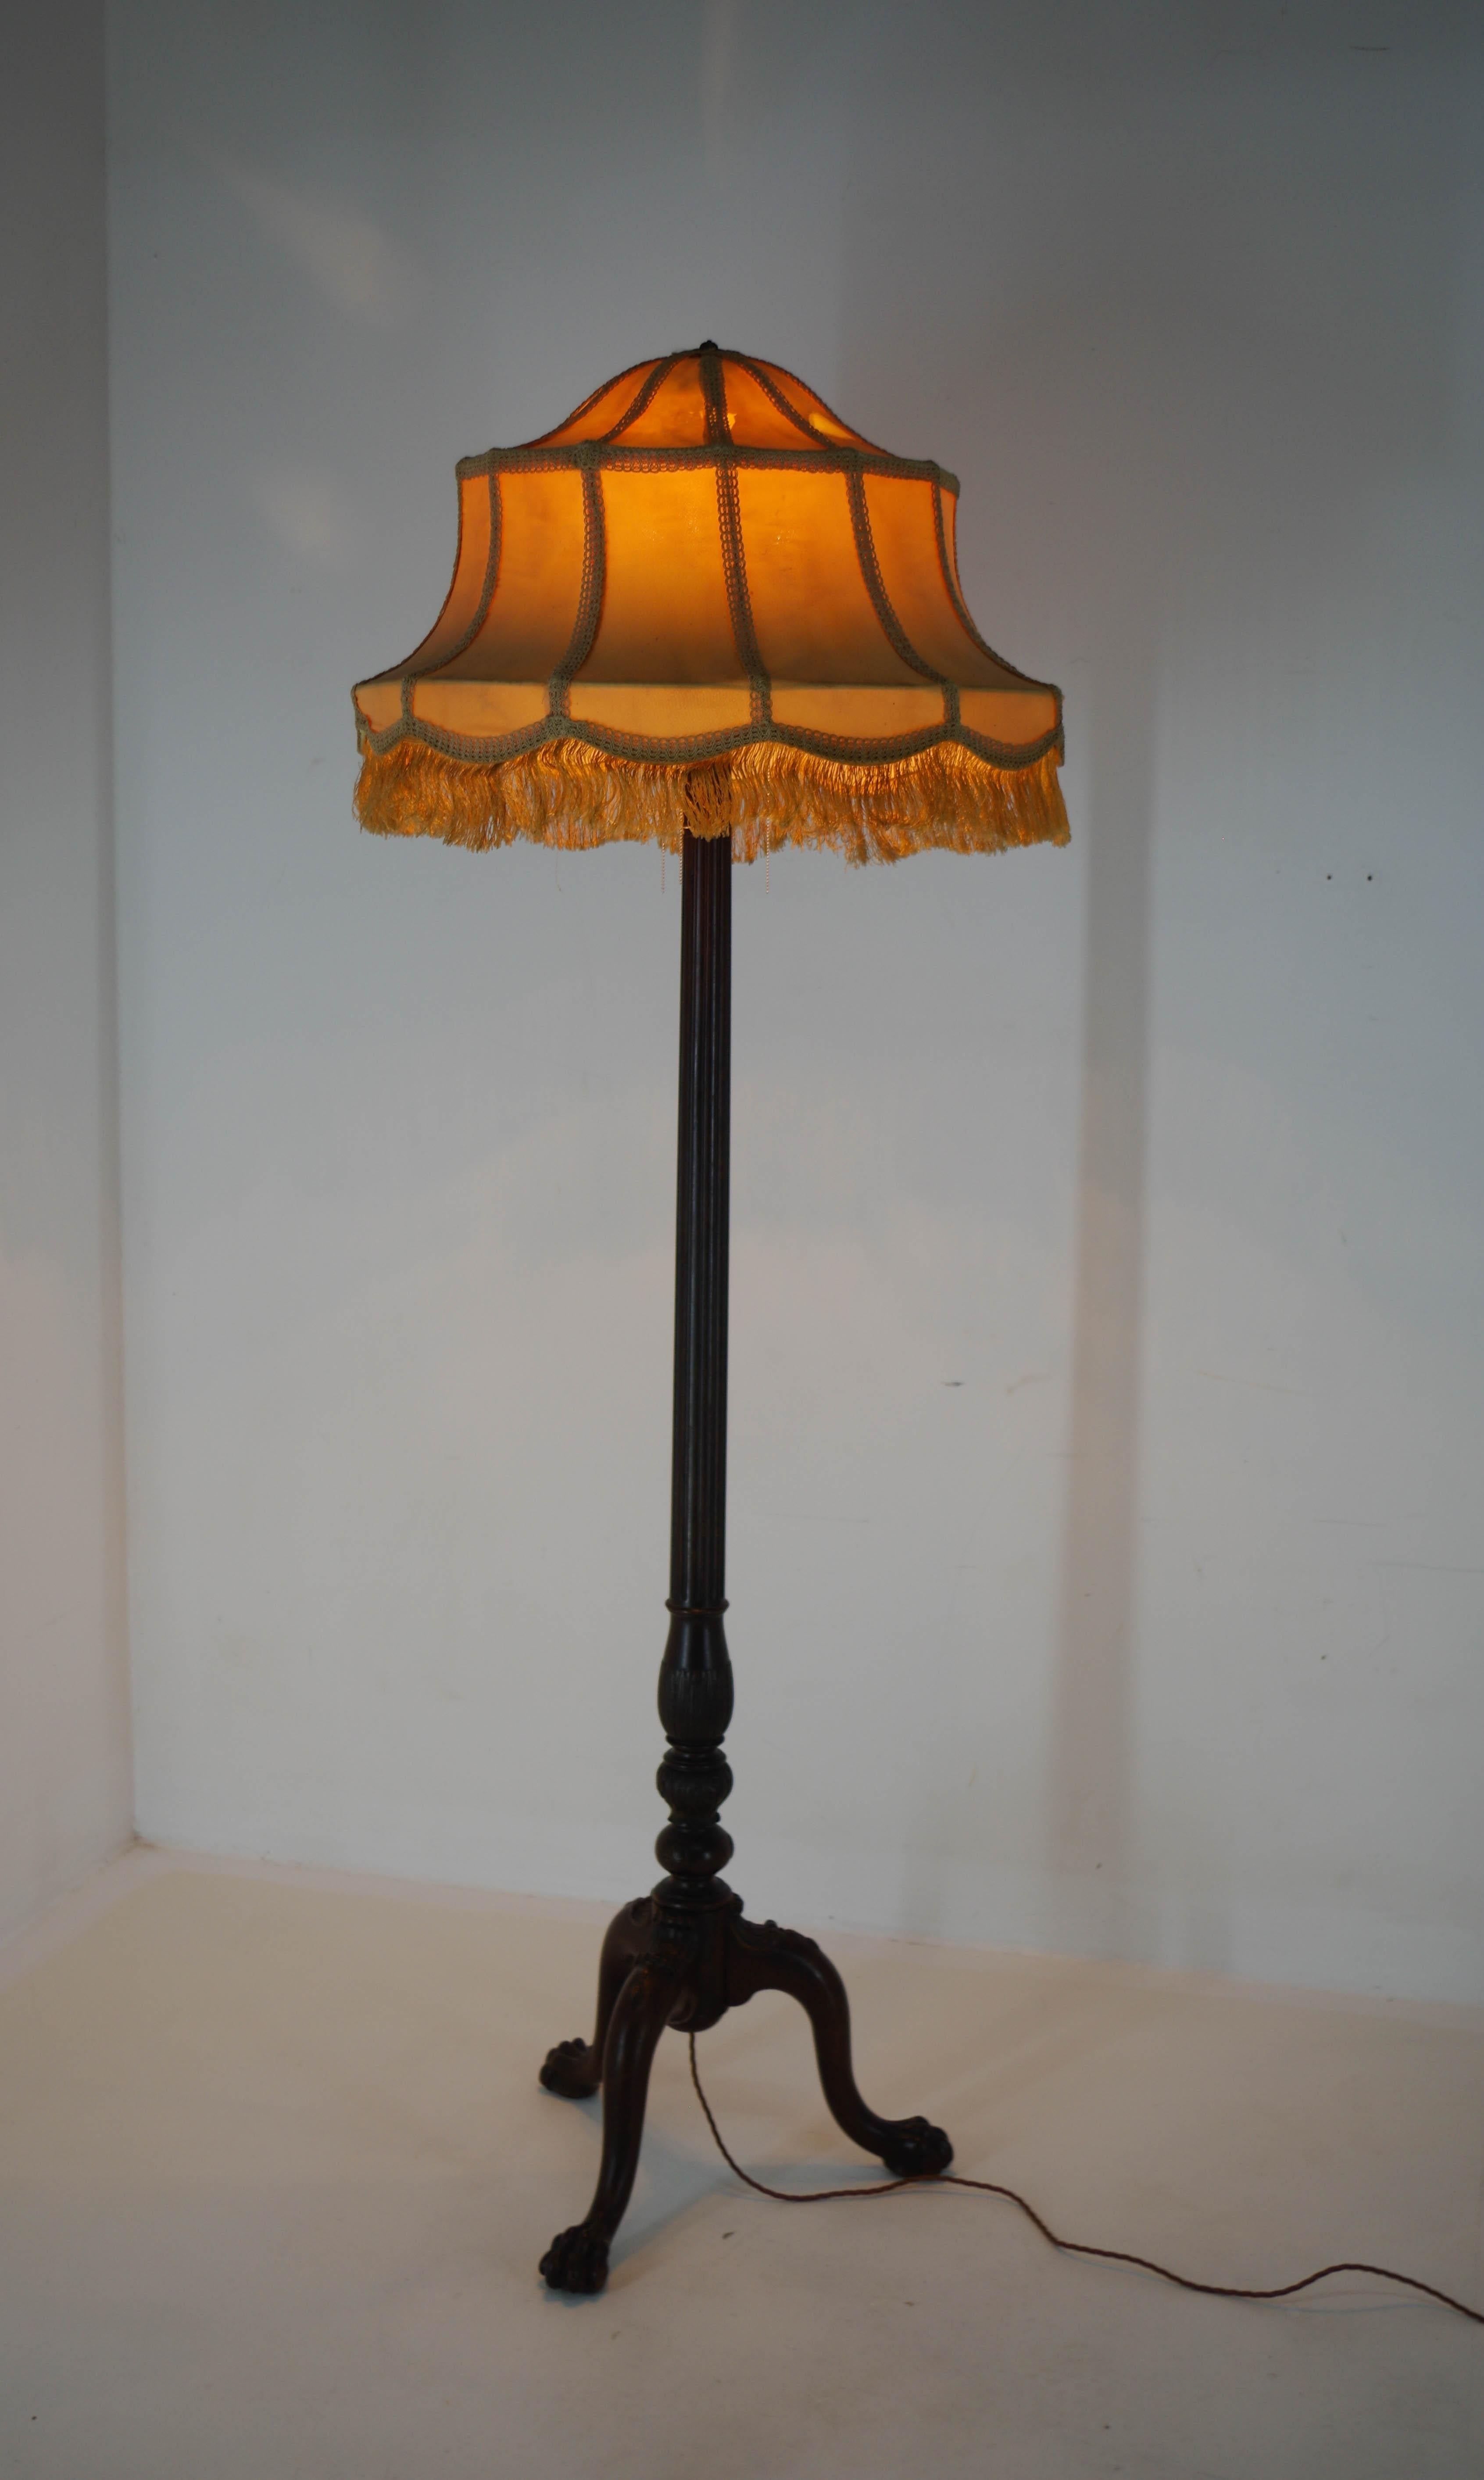 Big Art Nouveau floor lamp. An eye-catching piece with a beautiful patina and warm ambient light. 
Wooden stand with good condition and original fabric shade in fair condition with some damage visible on pictures.
Item was newly rewired, it is